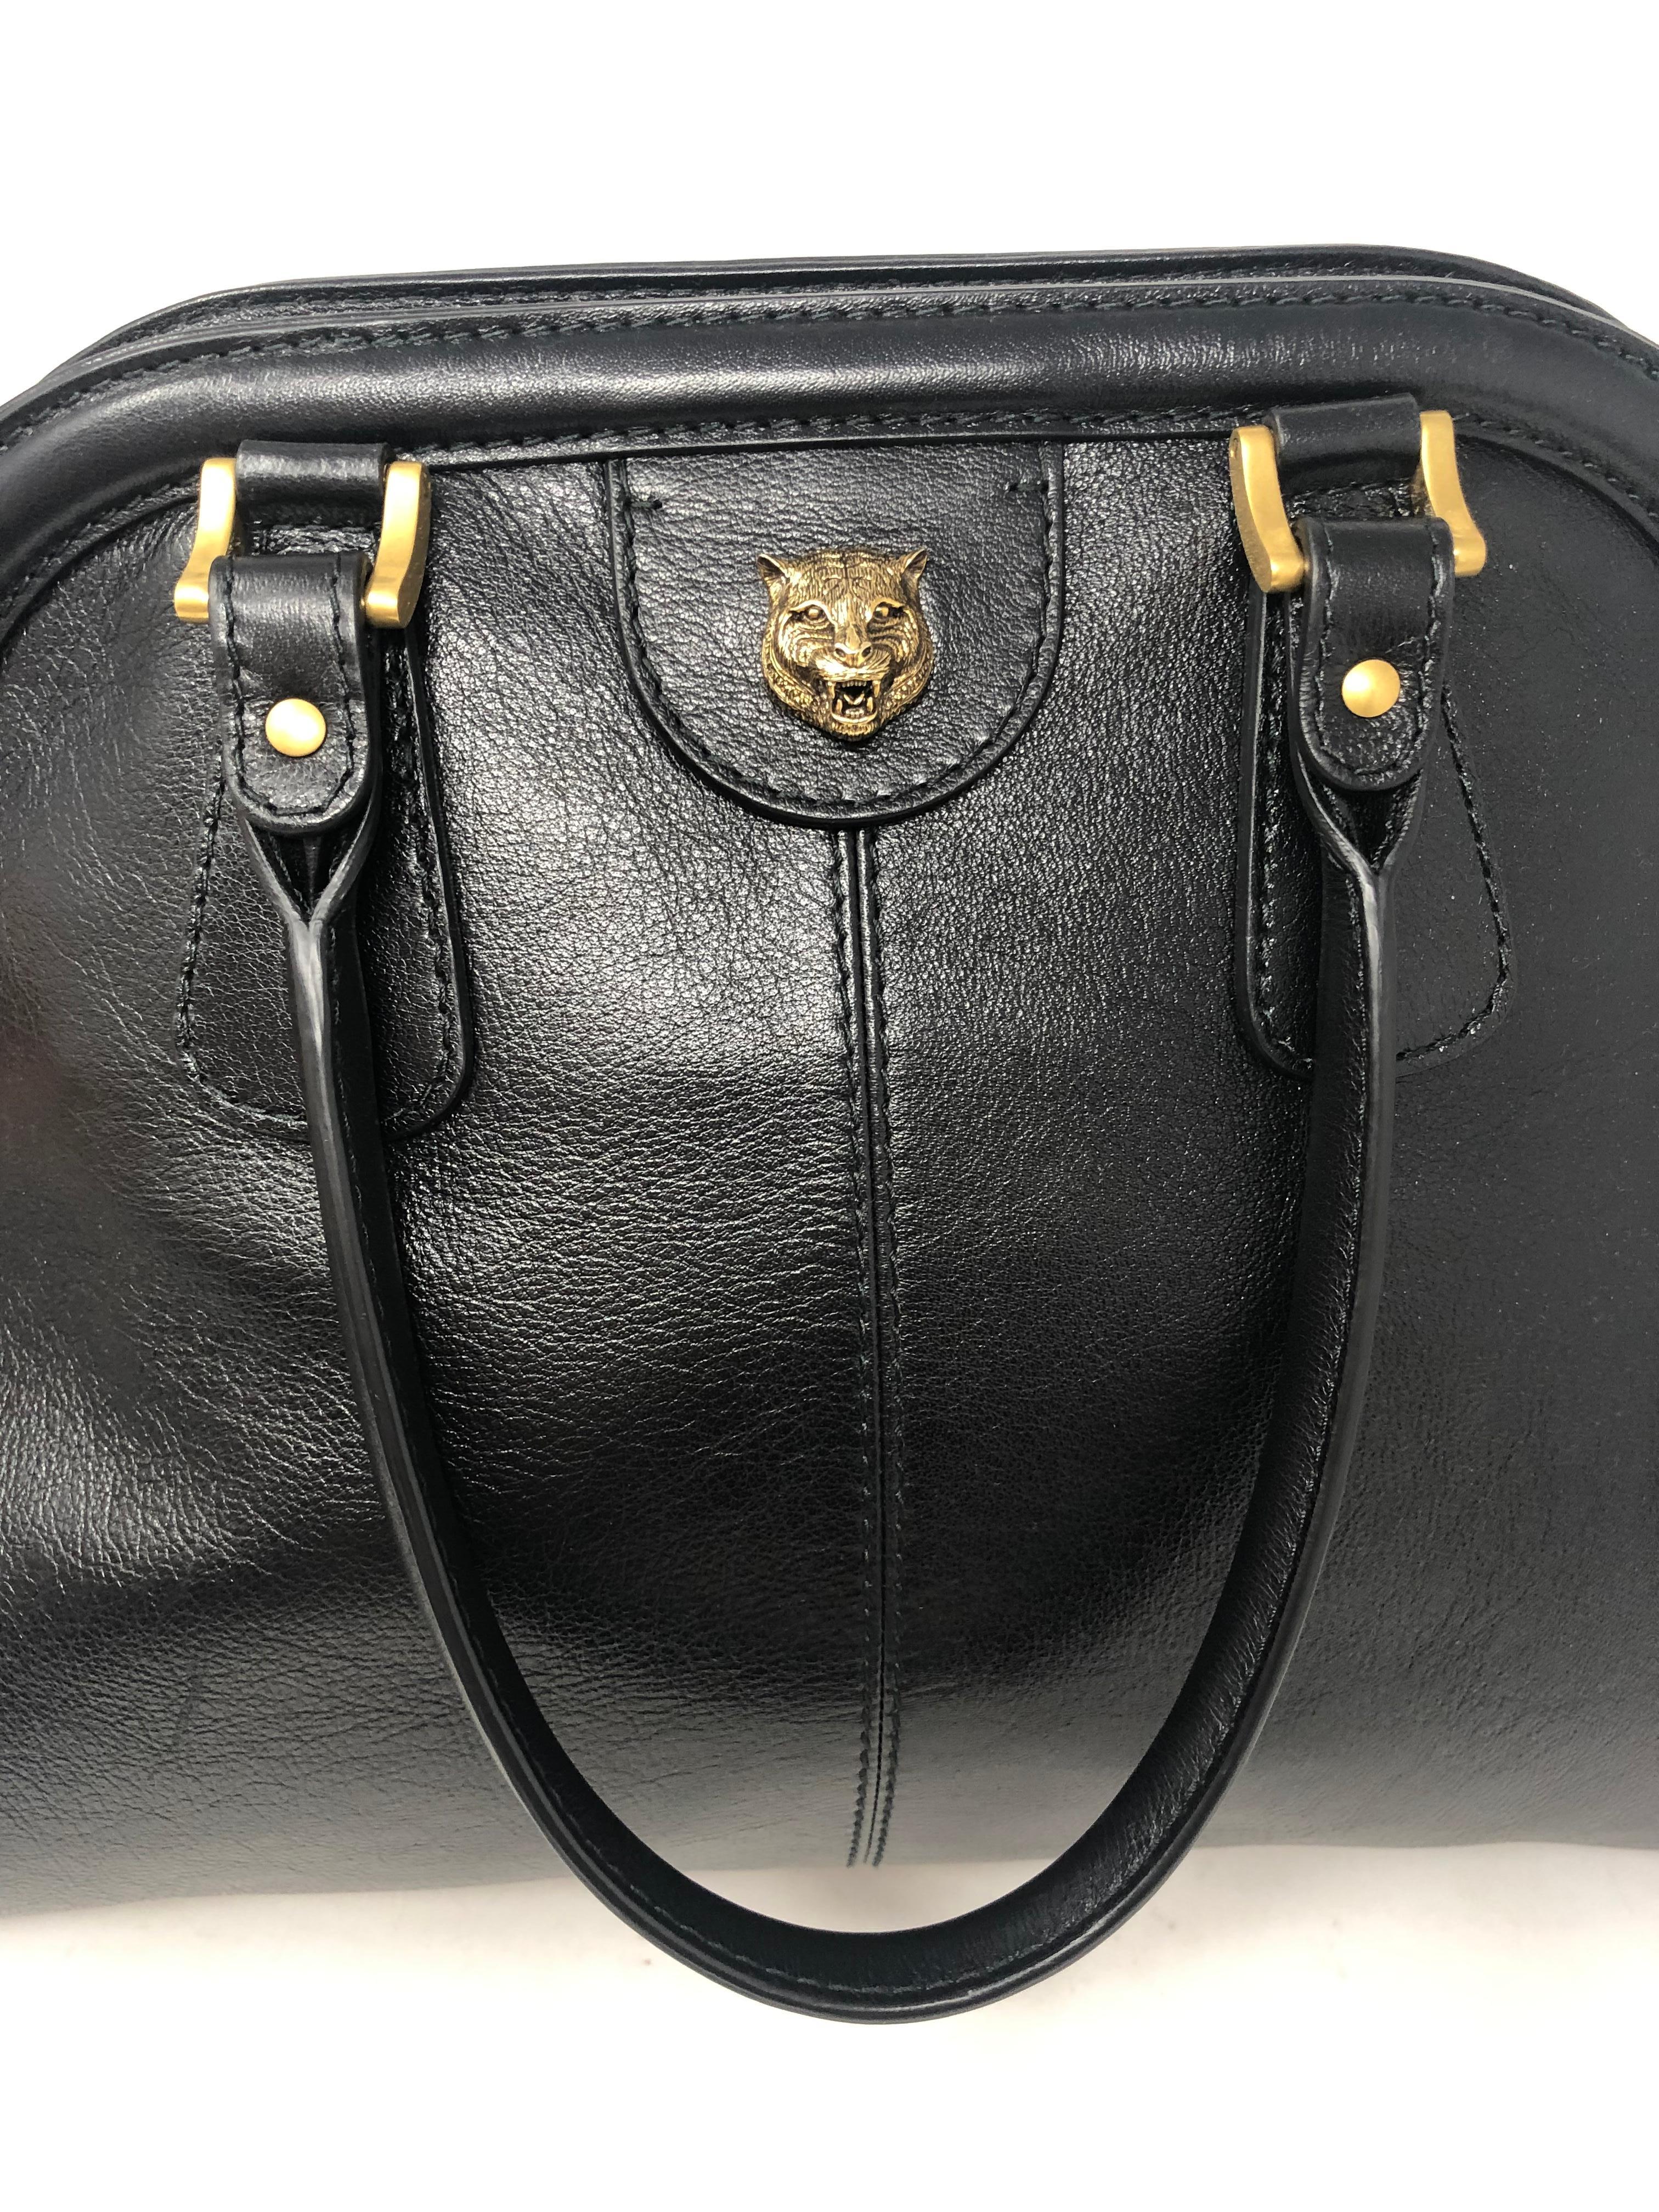 Gucci RE(Belle) Large leather top handle bag. Brand new and never used. Smooth leather top handle with antiqued gold hardware. GG logo on one side. Feline head on the other side. 13'